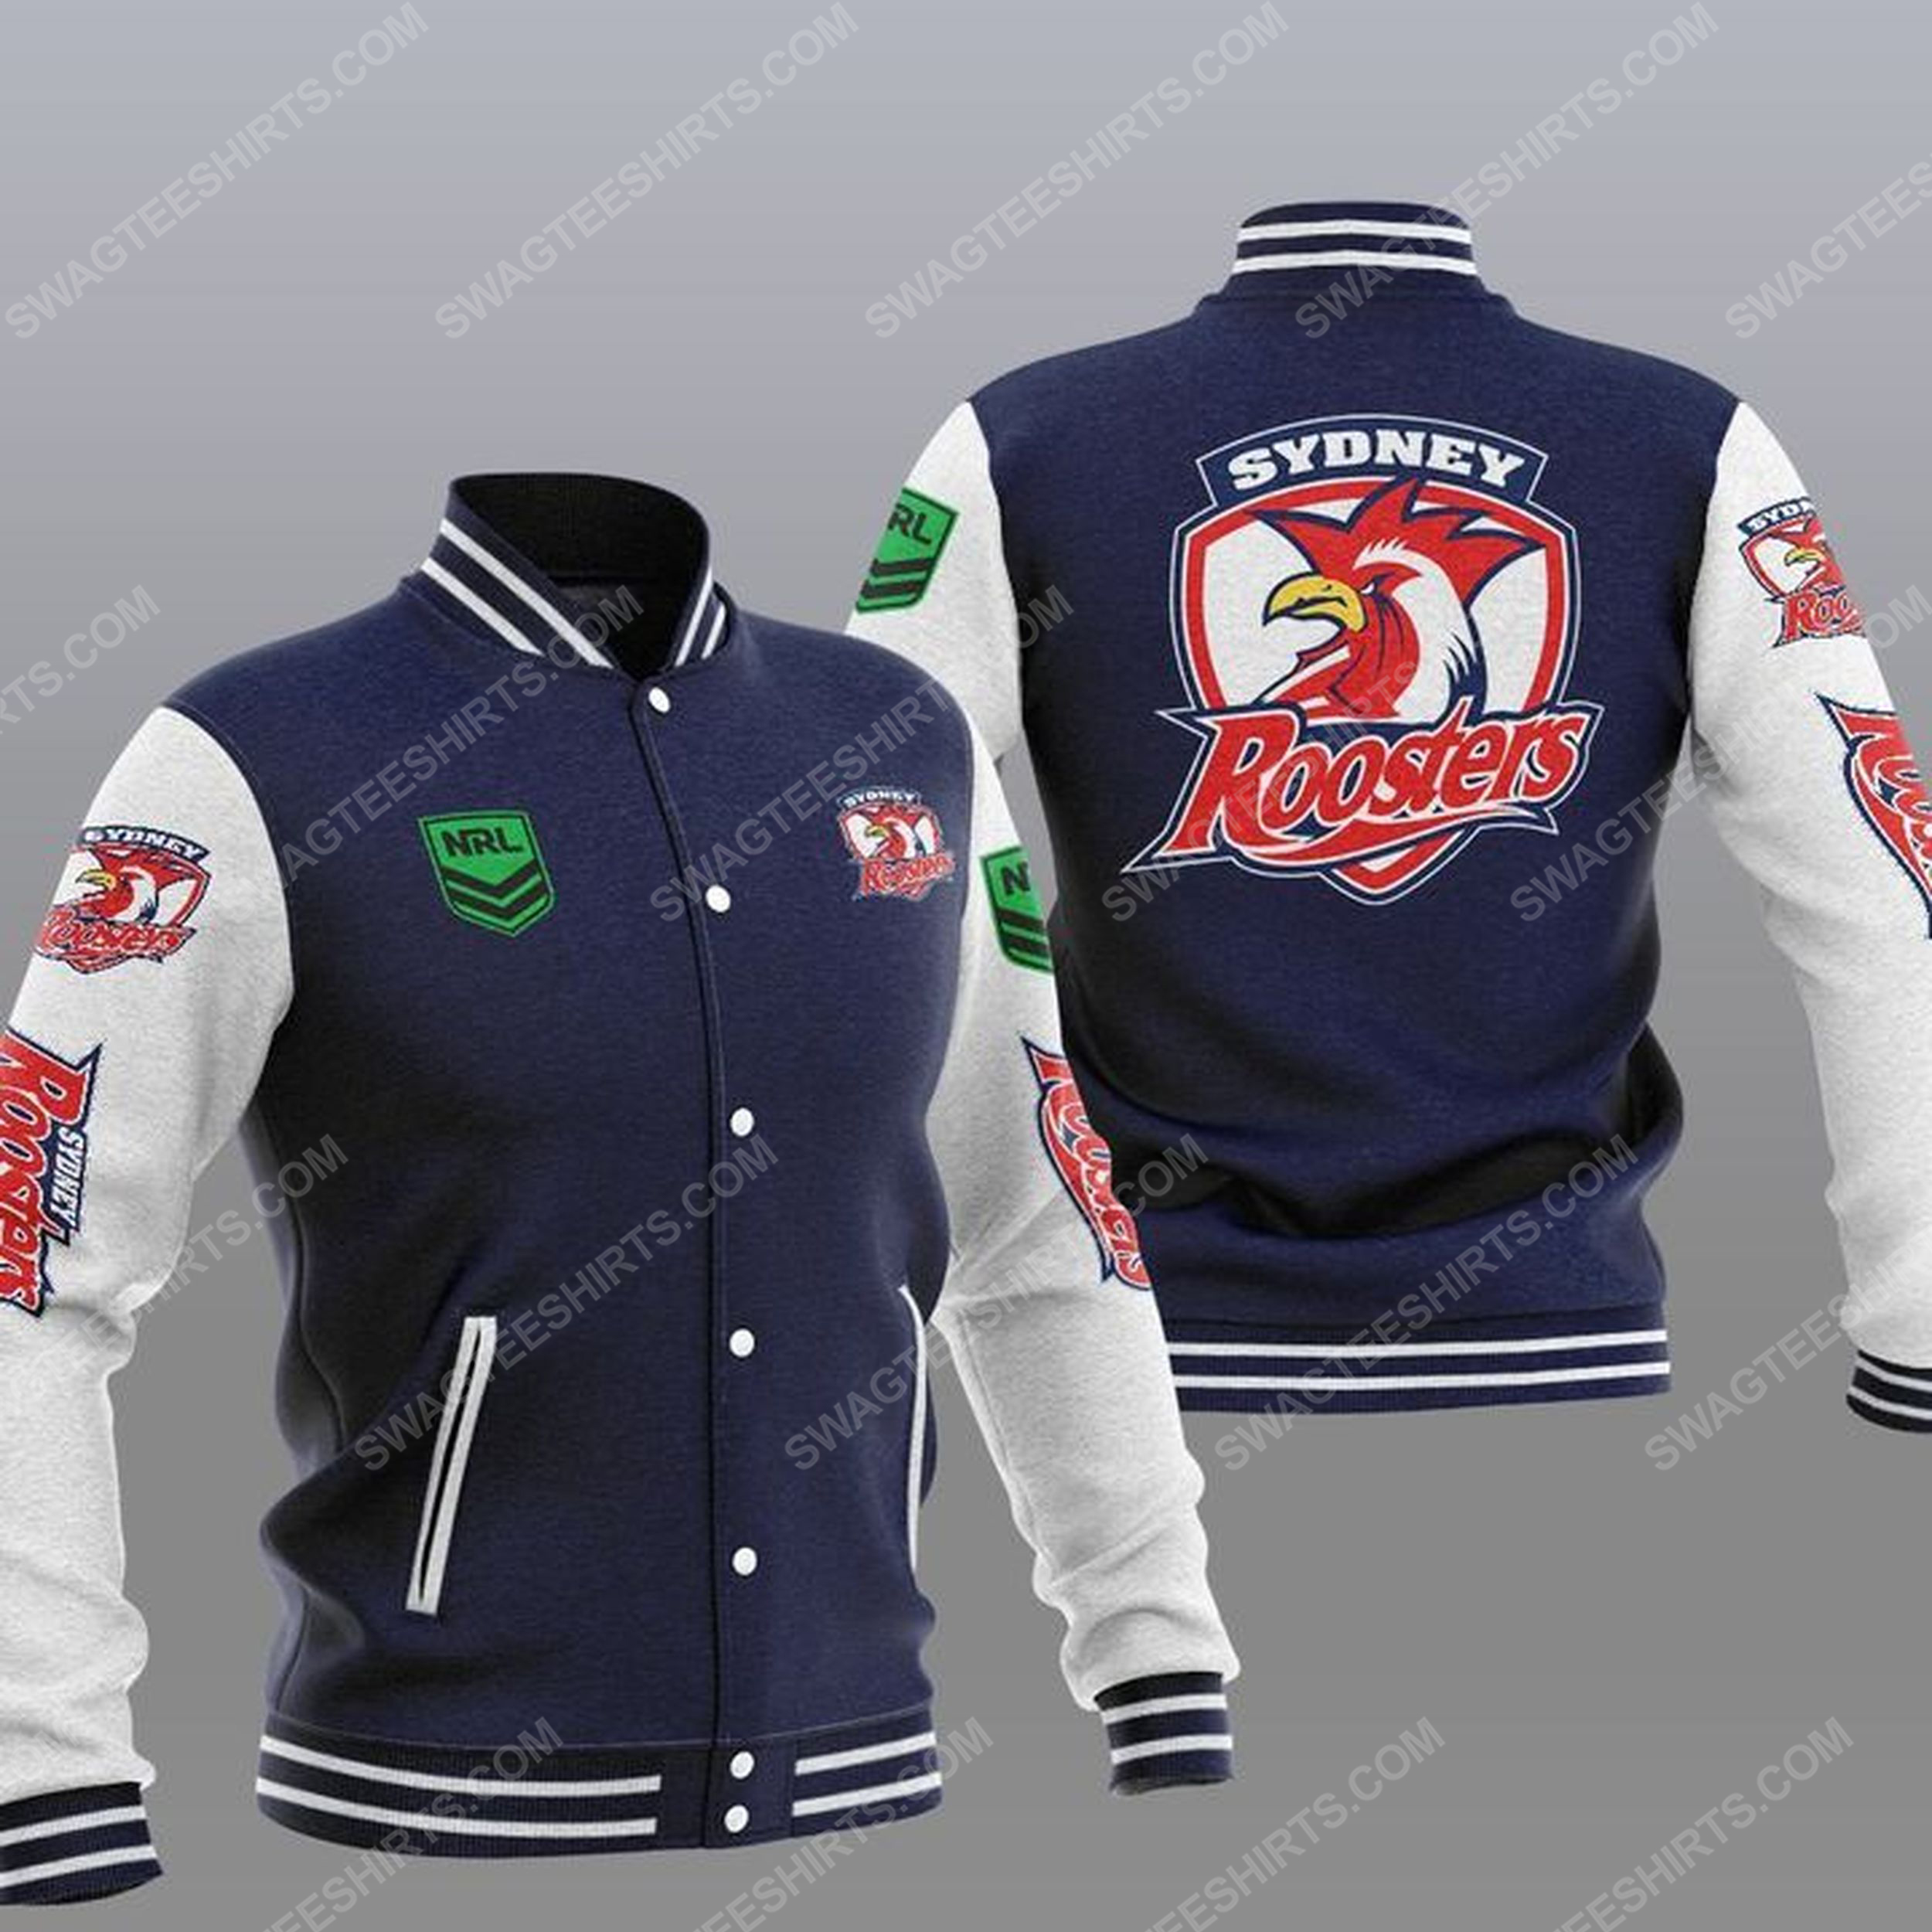 The sydney roosters nfl all over print baseball jacket - navy 1